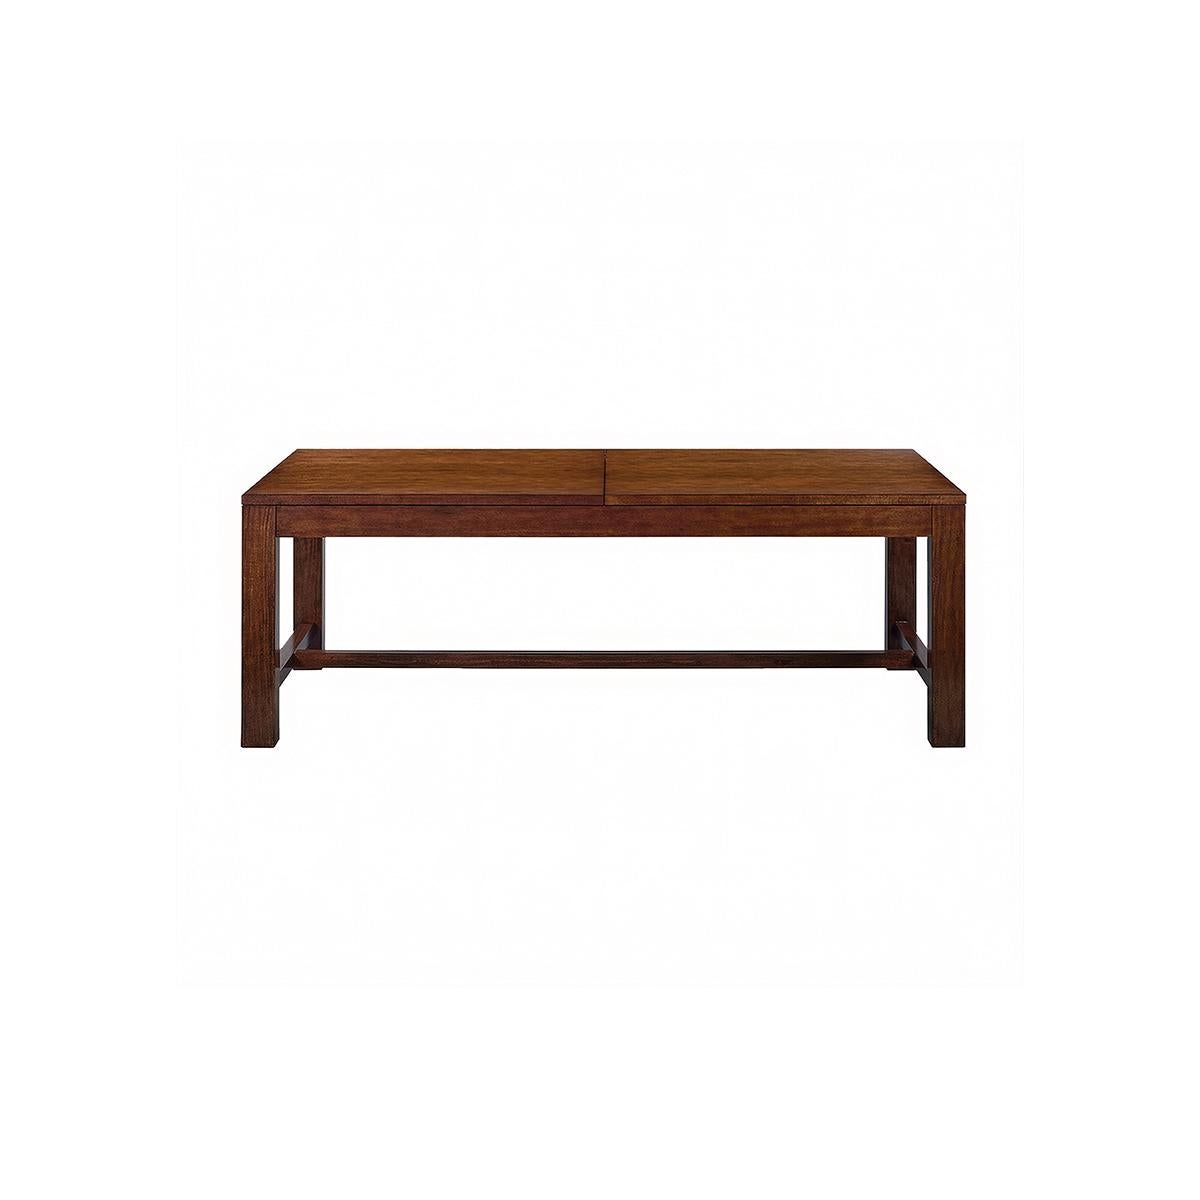 Parsons Dining Table - Mahogany Finish. This expandable dining table with an easy to open ratchet system has two self-storing leaves, has a warm country mahogany wood tone finish with natural highlights, time-worn physical distressing, and